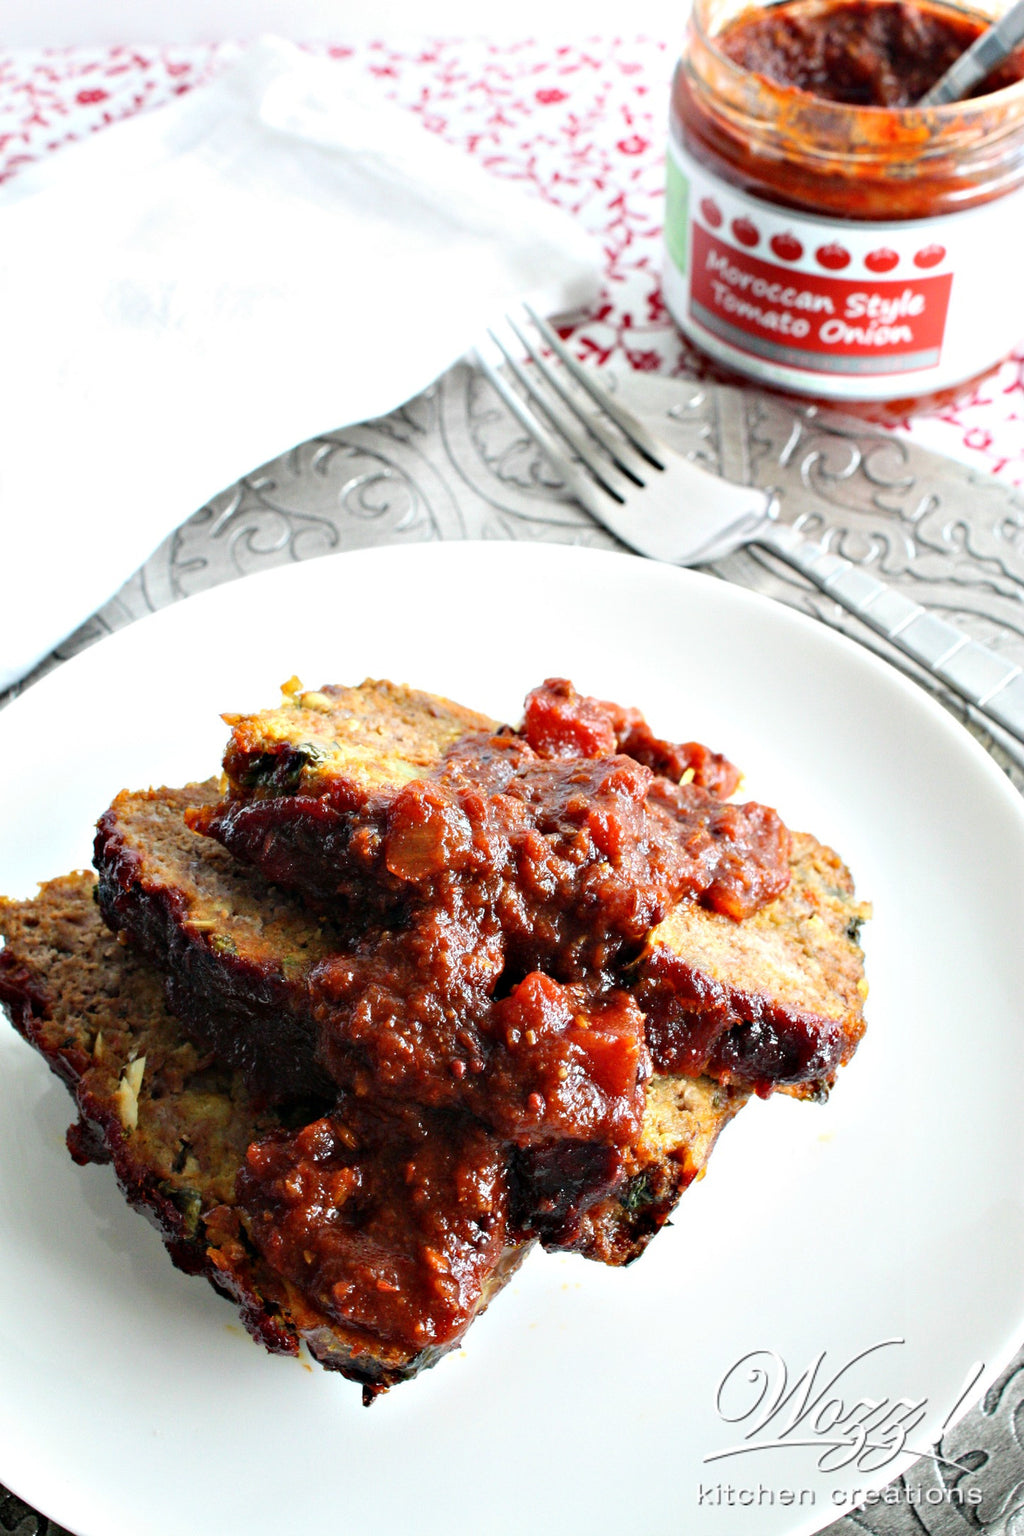 Moroccan Meatloaf Recipe | Wozz! Kitchen Creations